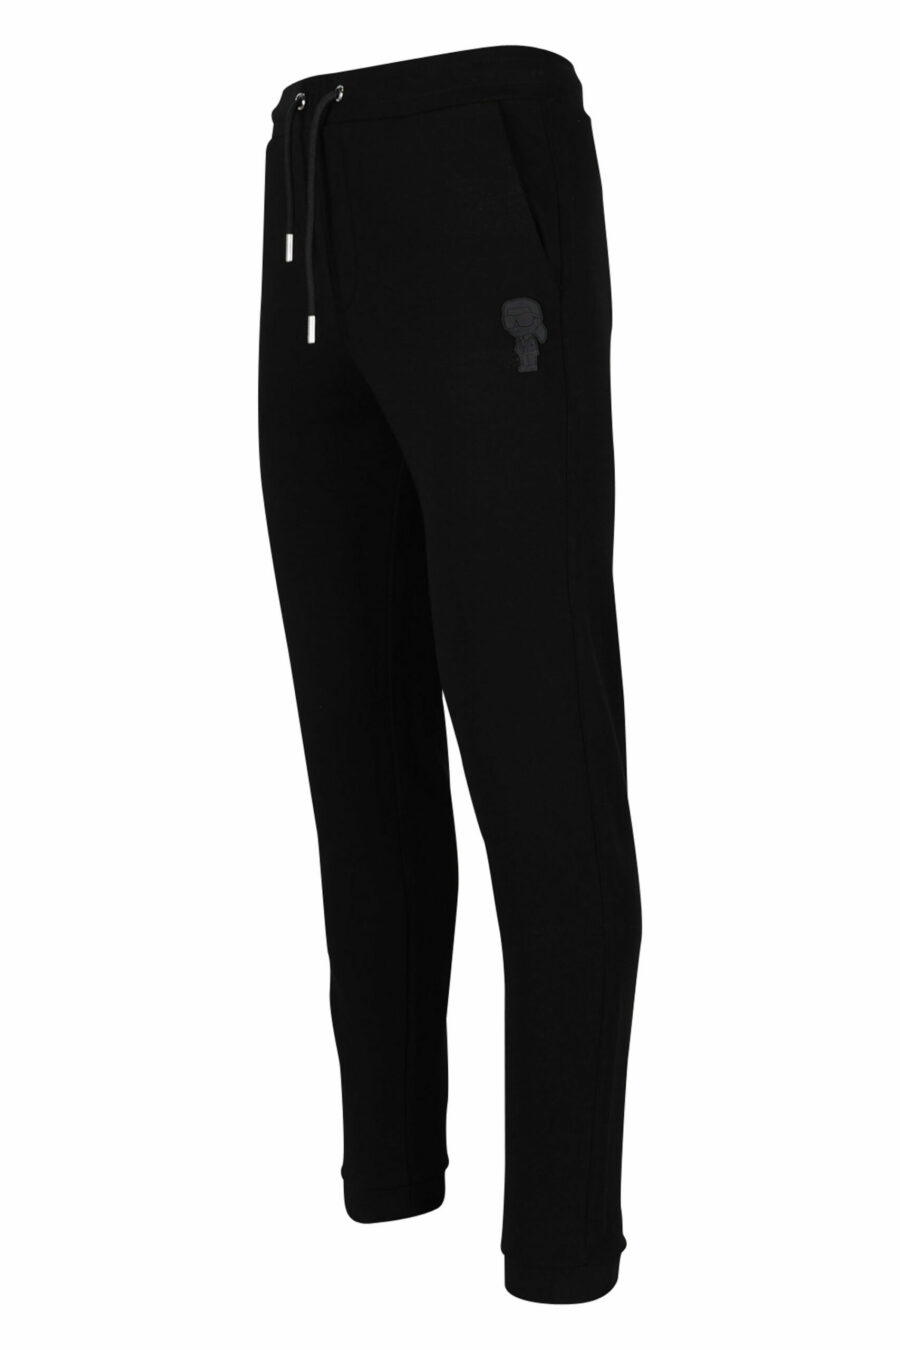 Tracksuit bottoms black with rubber mini-logo - 4062226393898 2 scaled